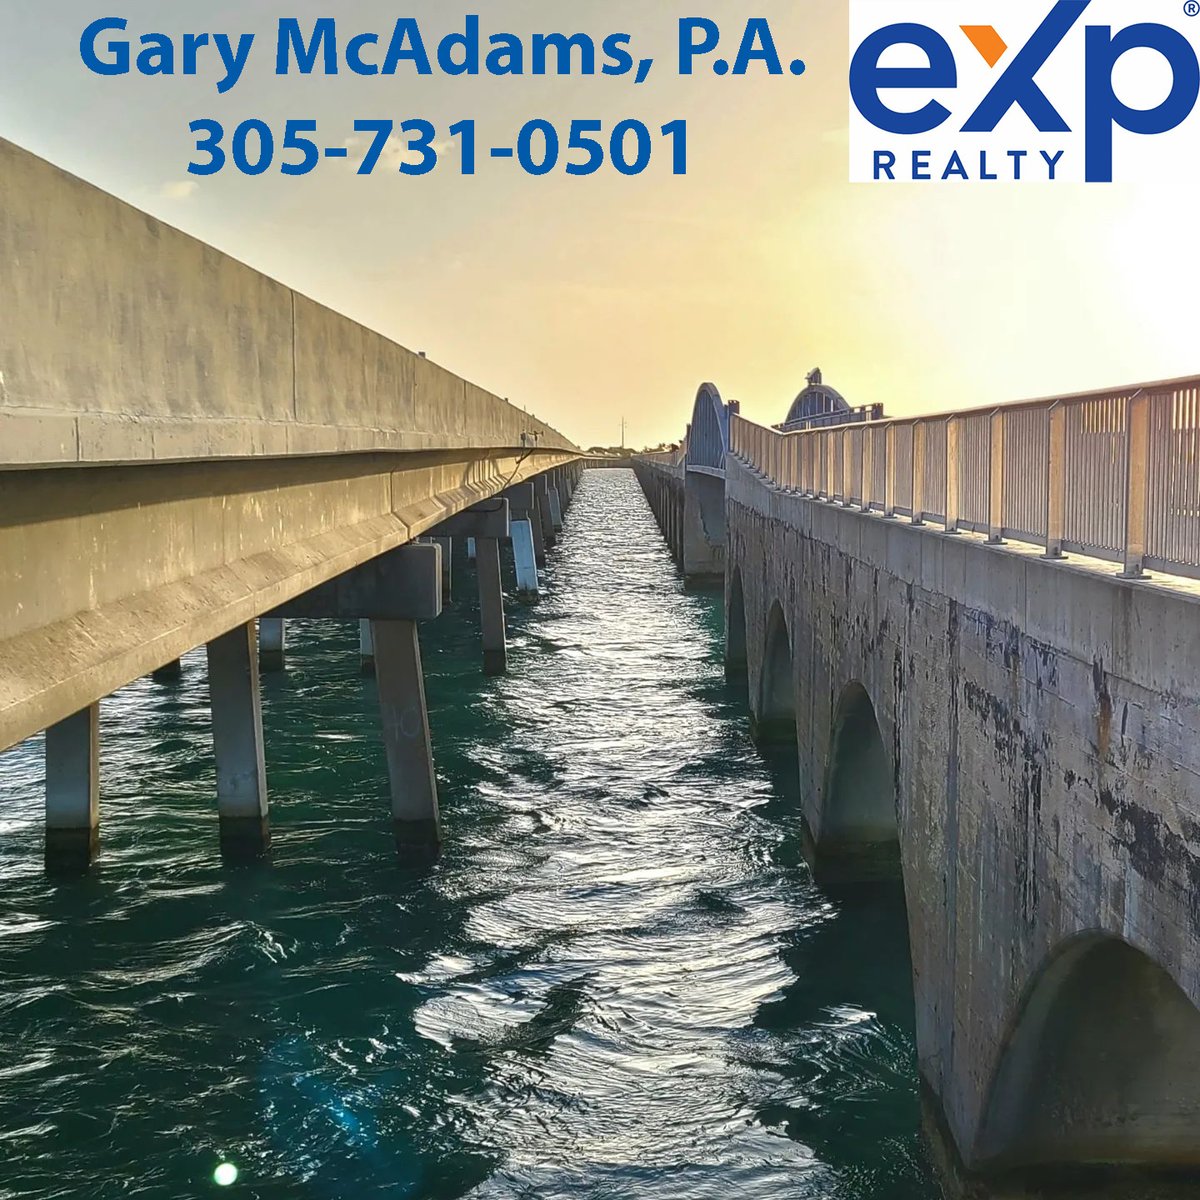 Sunset at the Seven Mile Bridge, old and new. Gary McAdams, Key West Realtor, eXp Realty, (305) 731-0501. #keywest #keywestrealestate #keywestrealtor #garymcadams #garymcadamsrealtor #FloridaKeysRealEstate #MLS #garymcadamskeywest #realestate #floridakeys #KeyWestHomesForSale